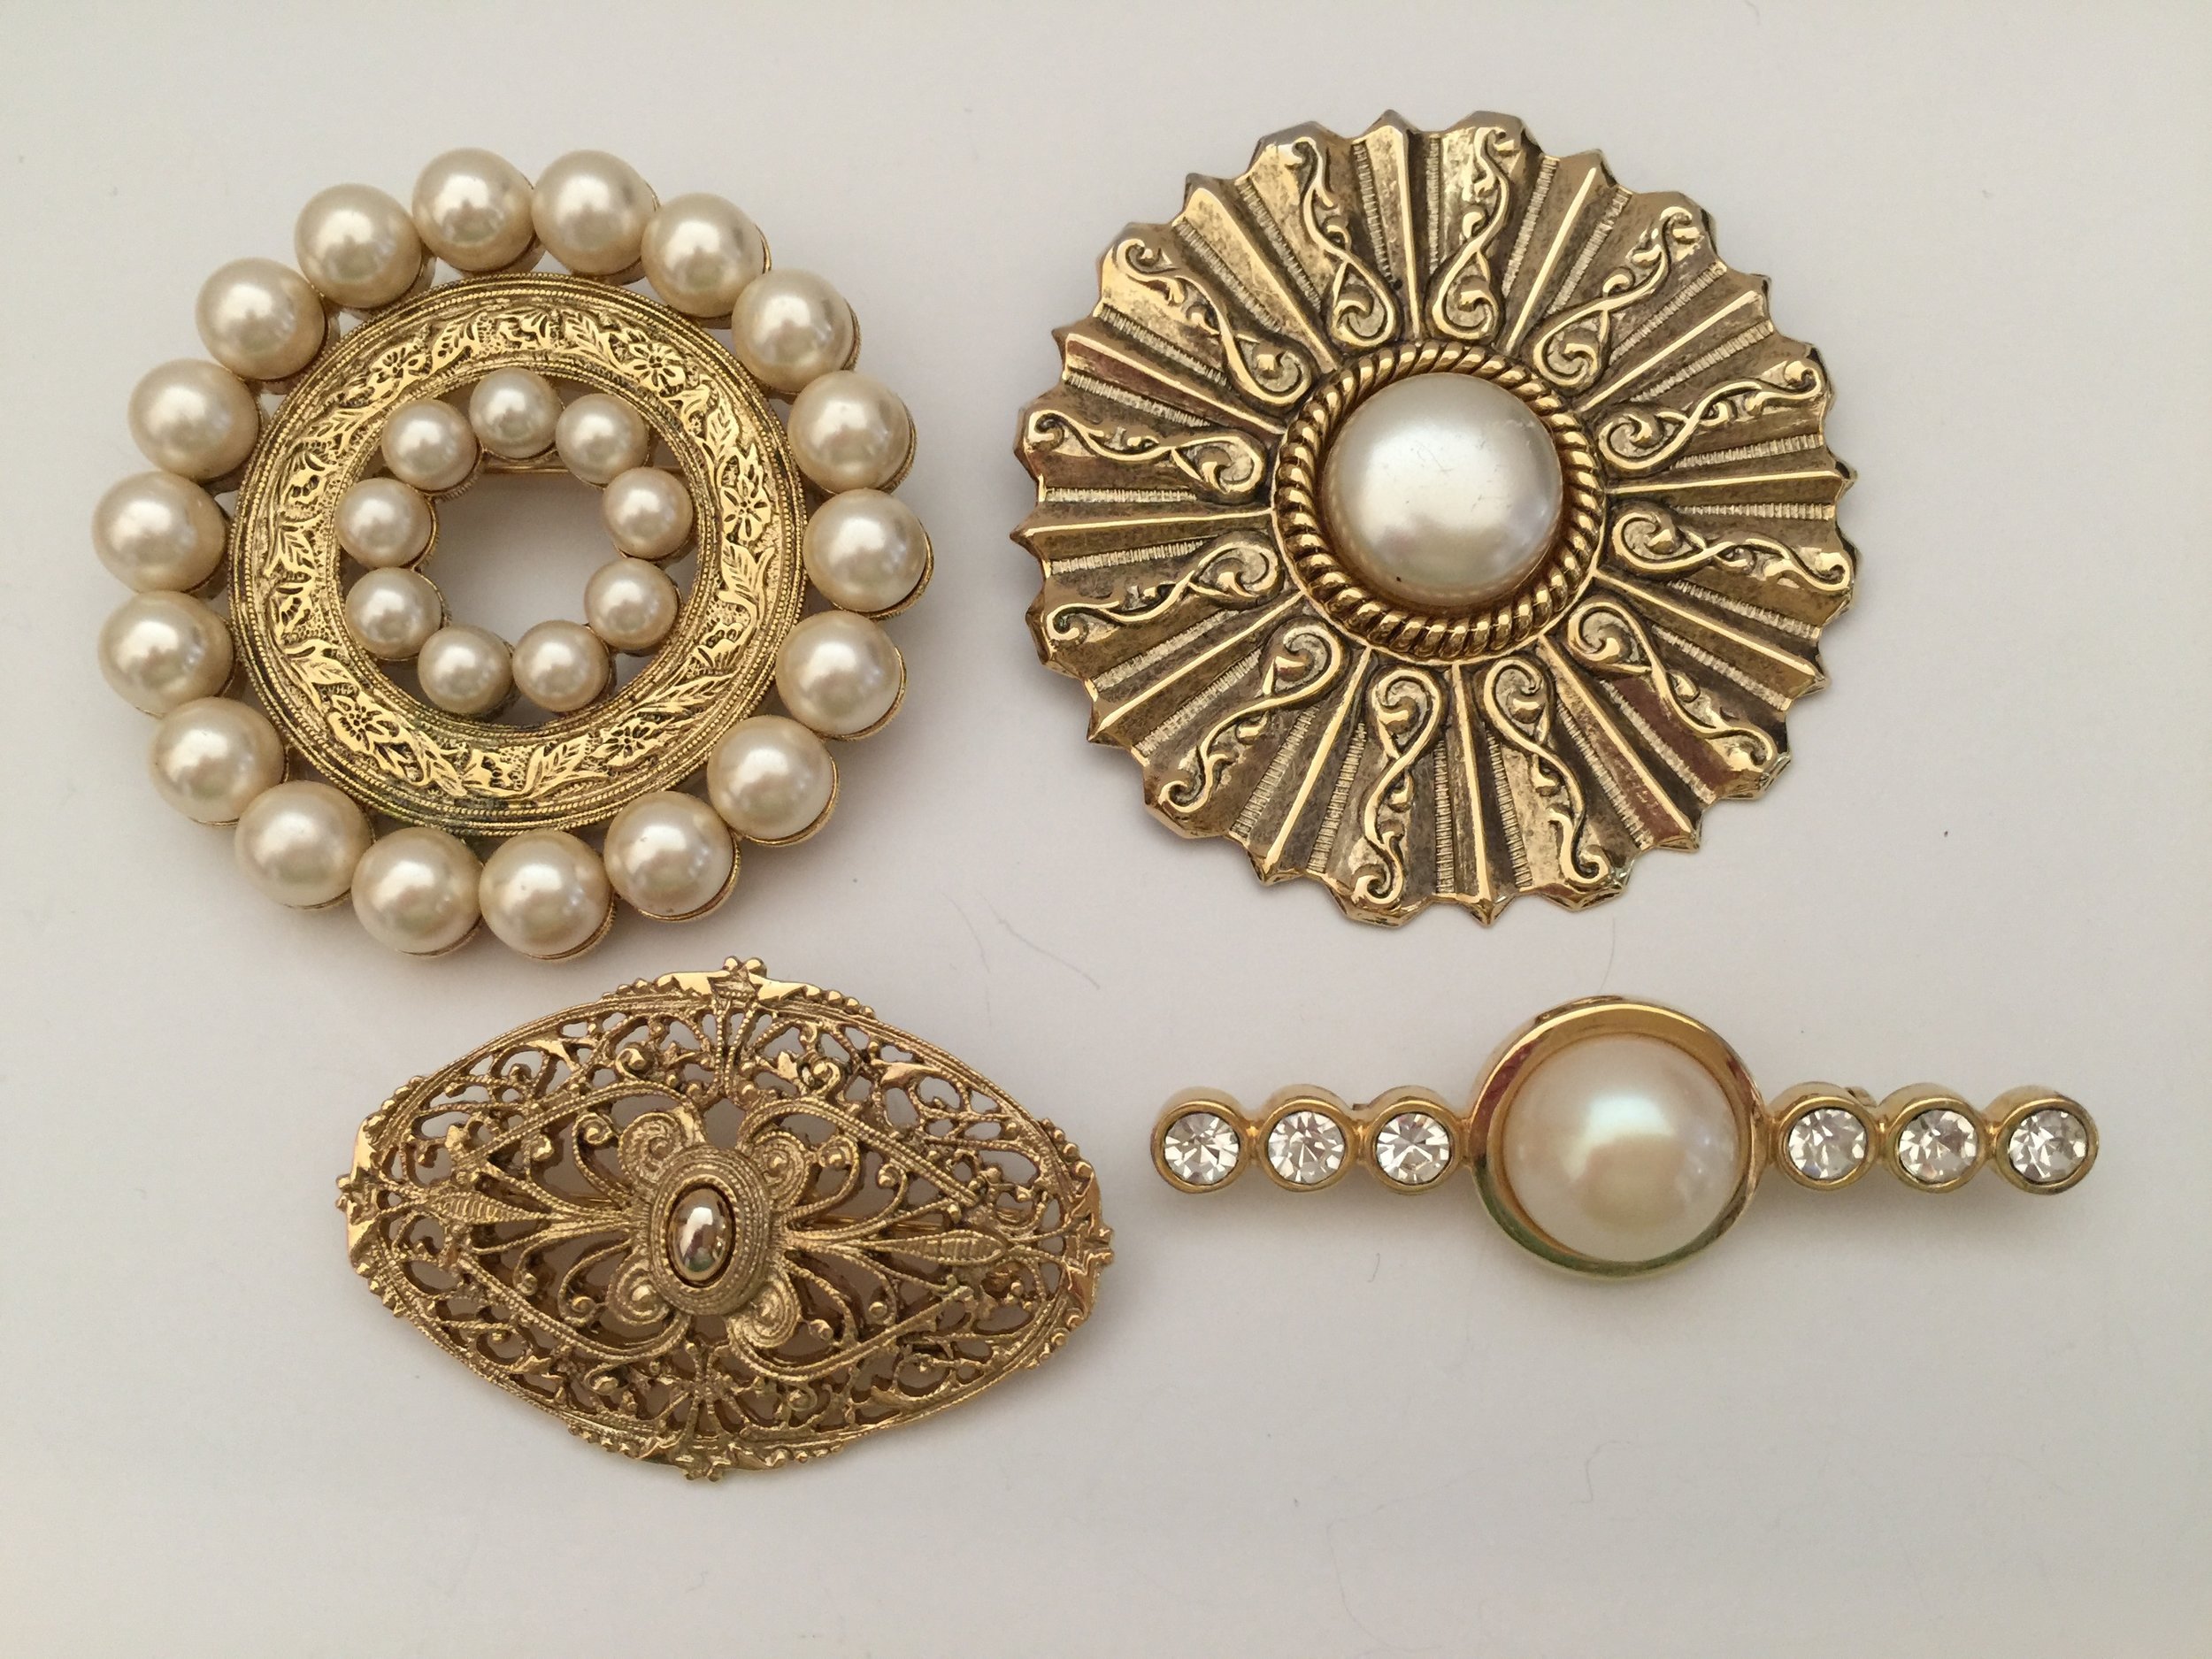 Pins and Brooches — Always a Collector